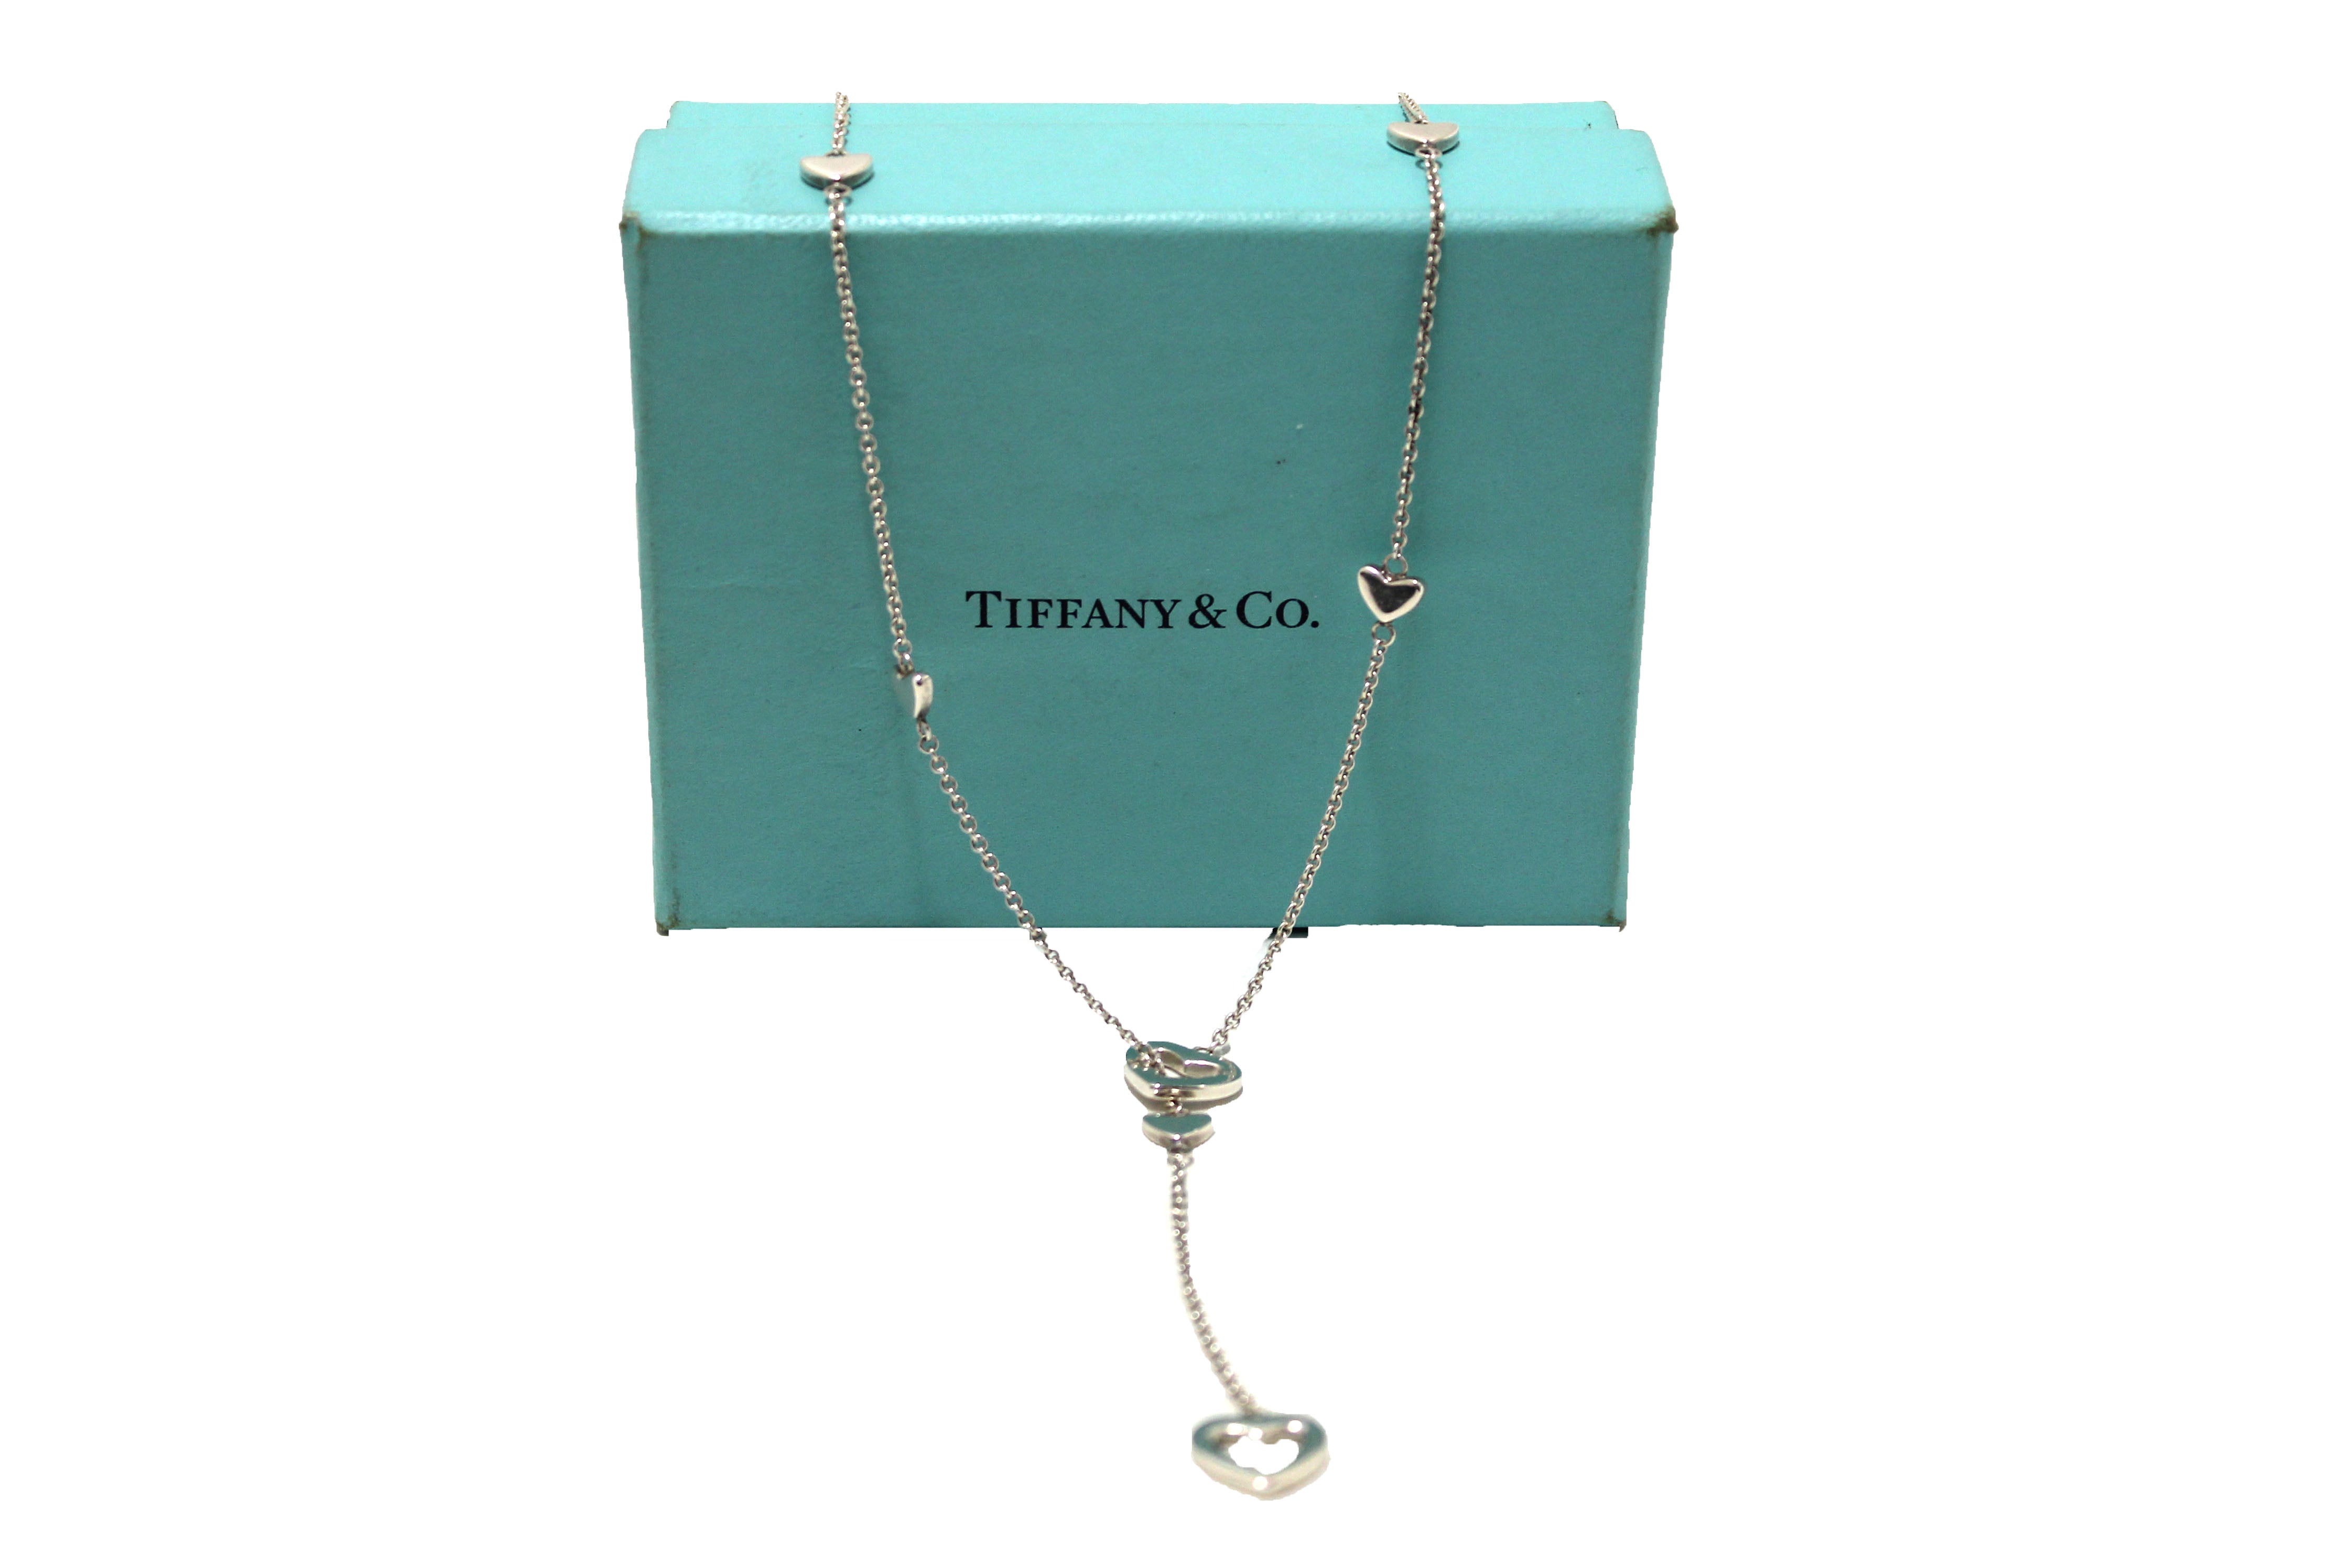 Authentic Tiffany & Co. Sterling Silver Heart Link Lariat Necklace